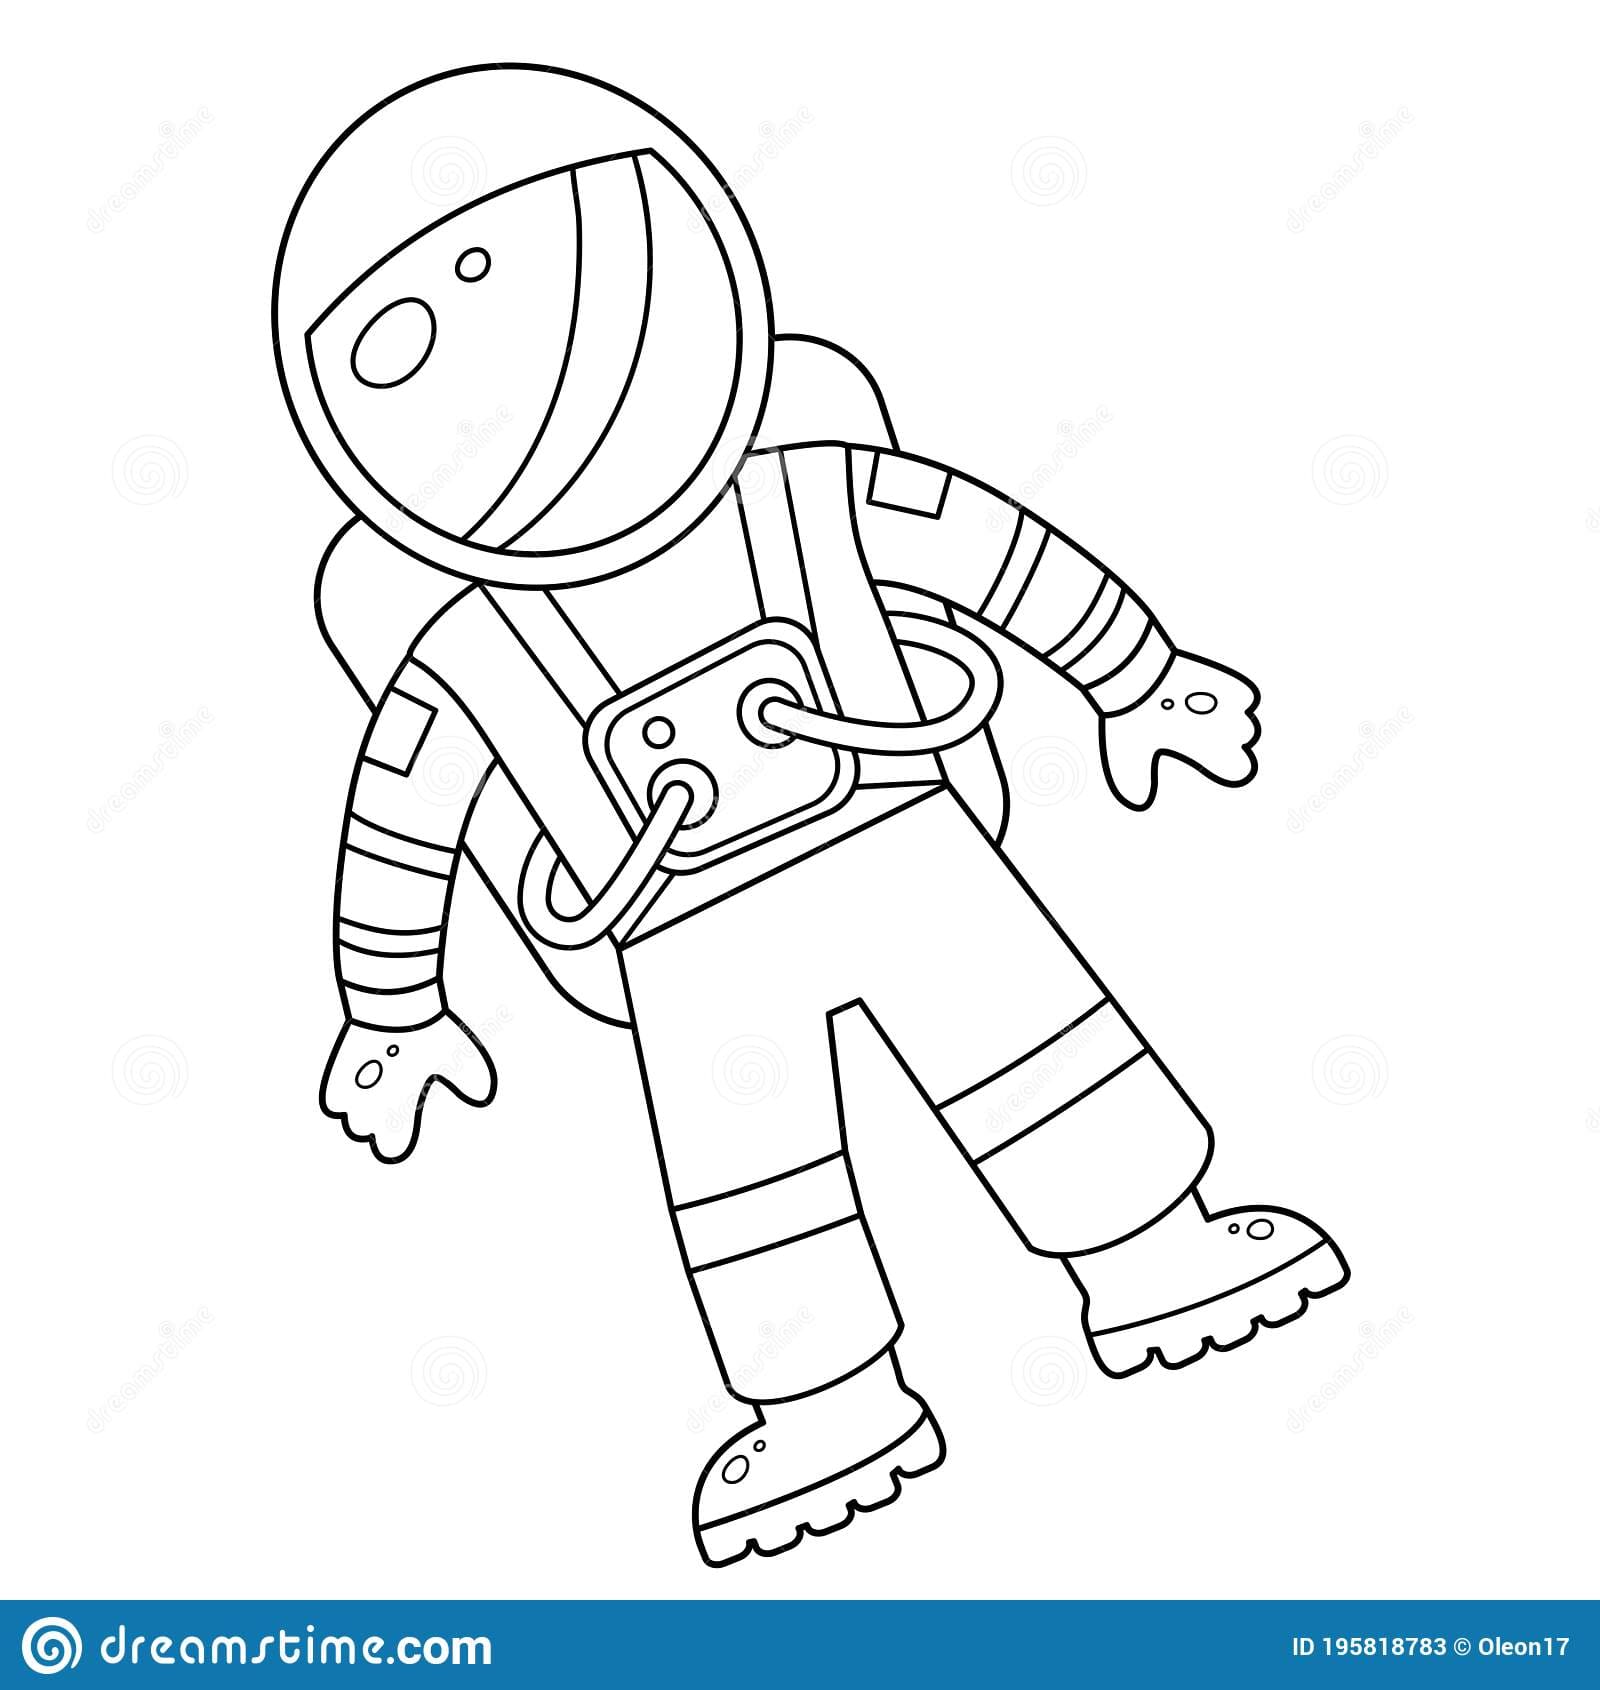 Coloring Page Outline Of a cartoon astronaut in spacesuit